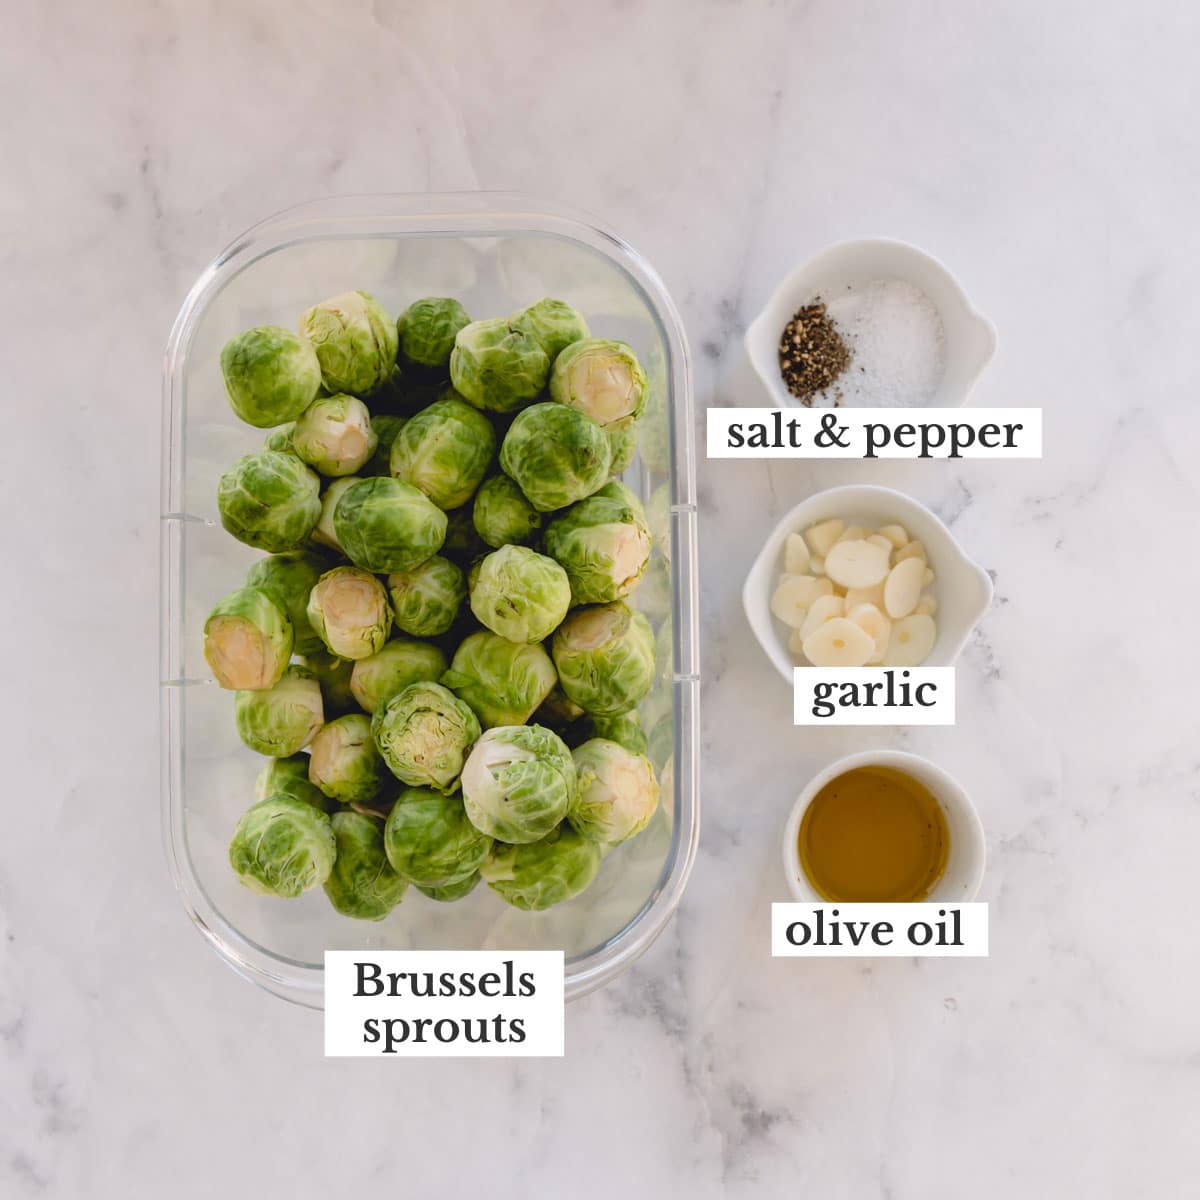 Ingredients for air fryer brussels sprouts.